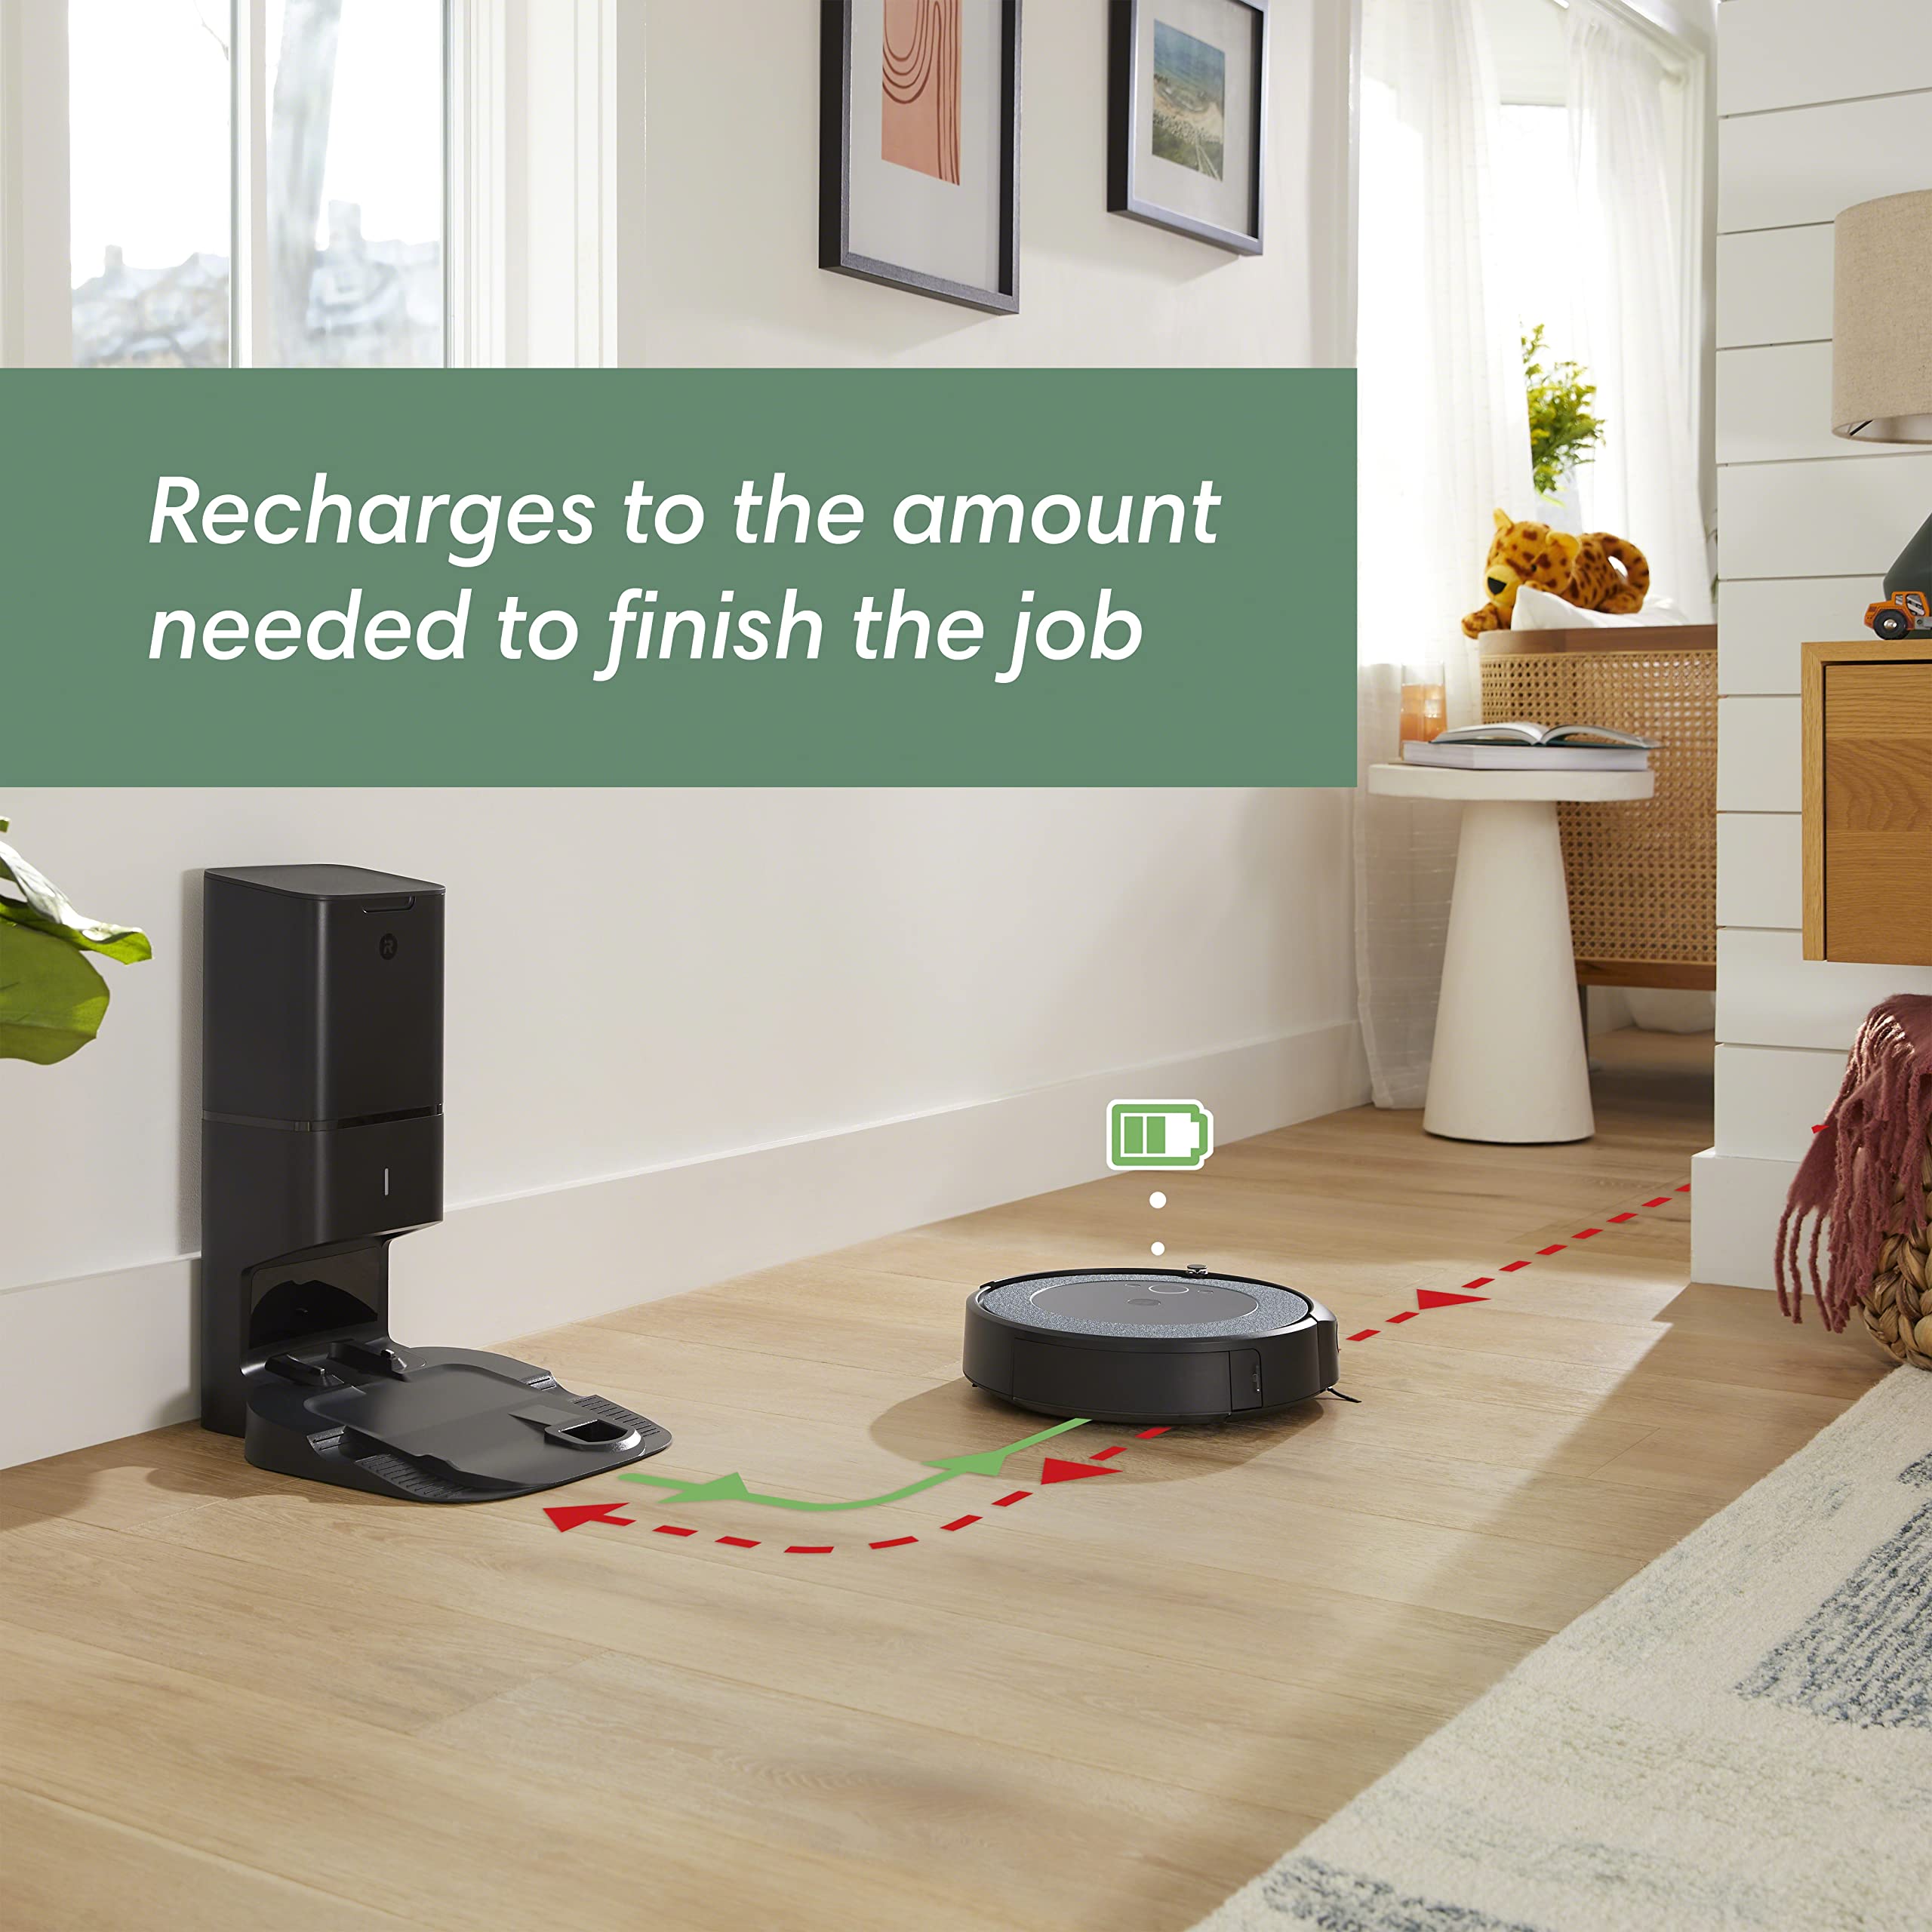 iRobot Roomba i4+ EVO (4552) Self Emptying Robot Vacuum - Empties Itself for up to 60 Days, Clean by Room with Smart Mapping, Compatible with Alexa, Ideal for Pet Hair, Carpets